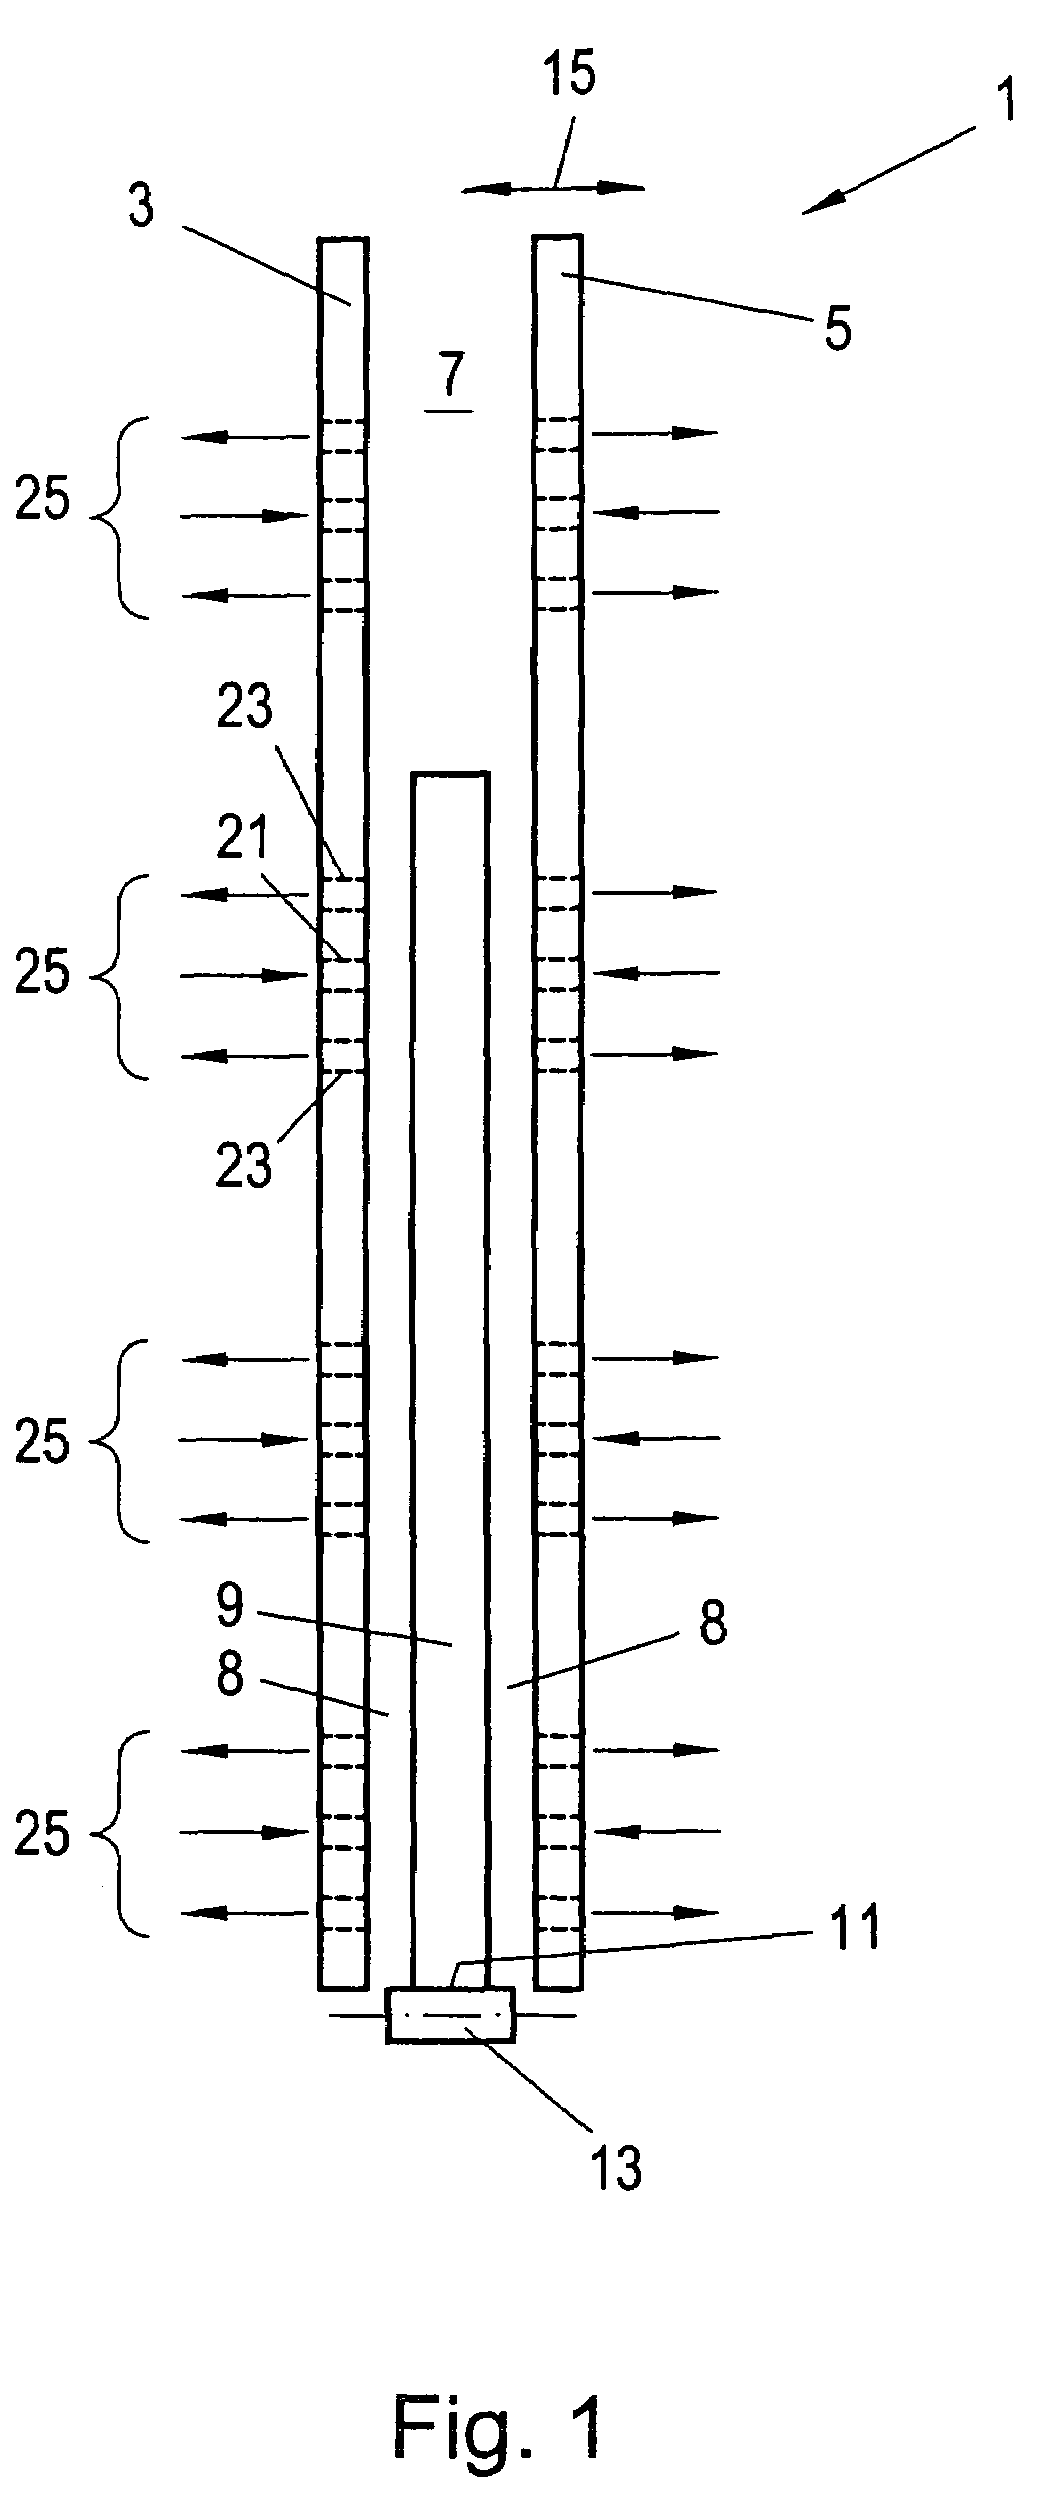 Device for transporting and supporting sheet-shaped articles, especially sheets of glass